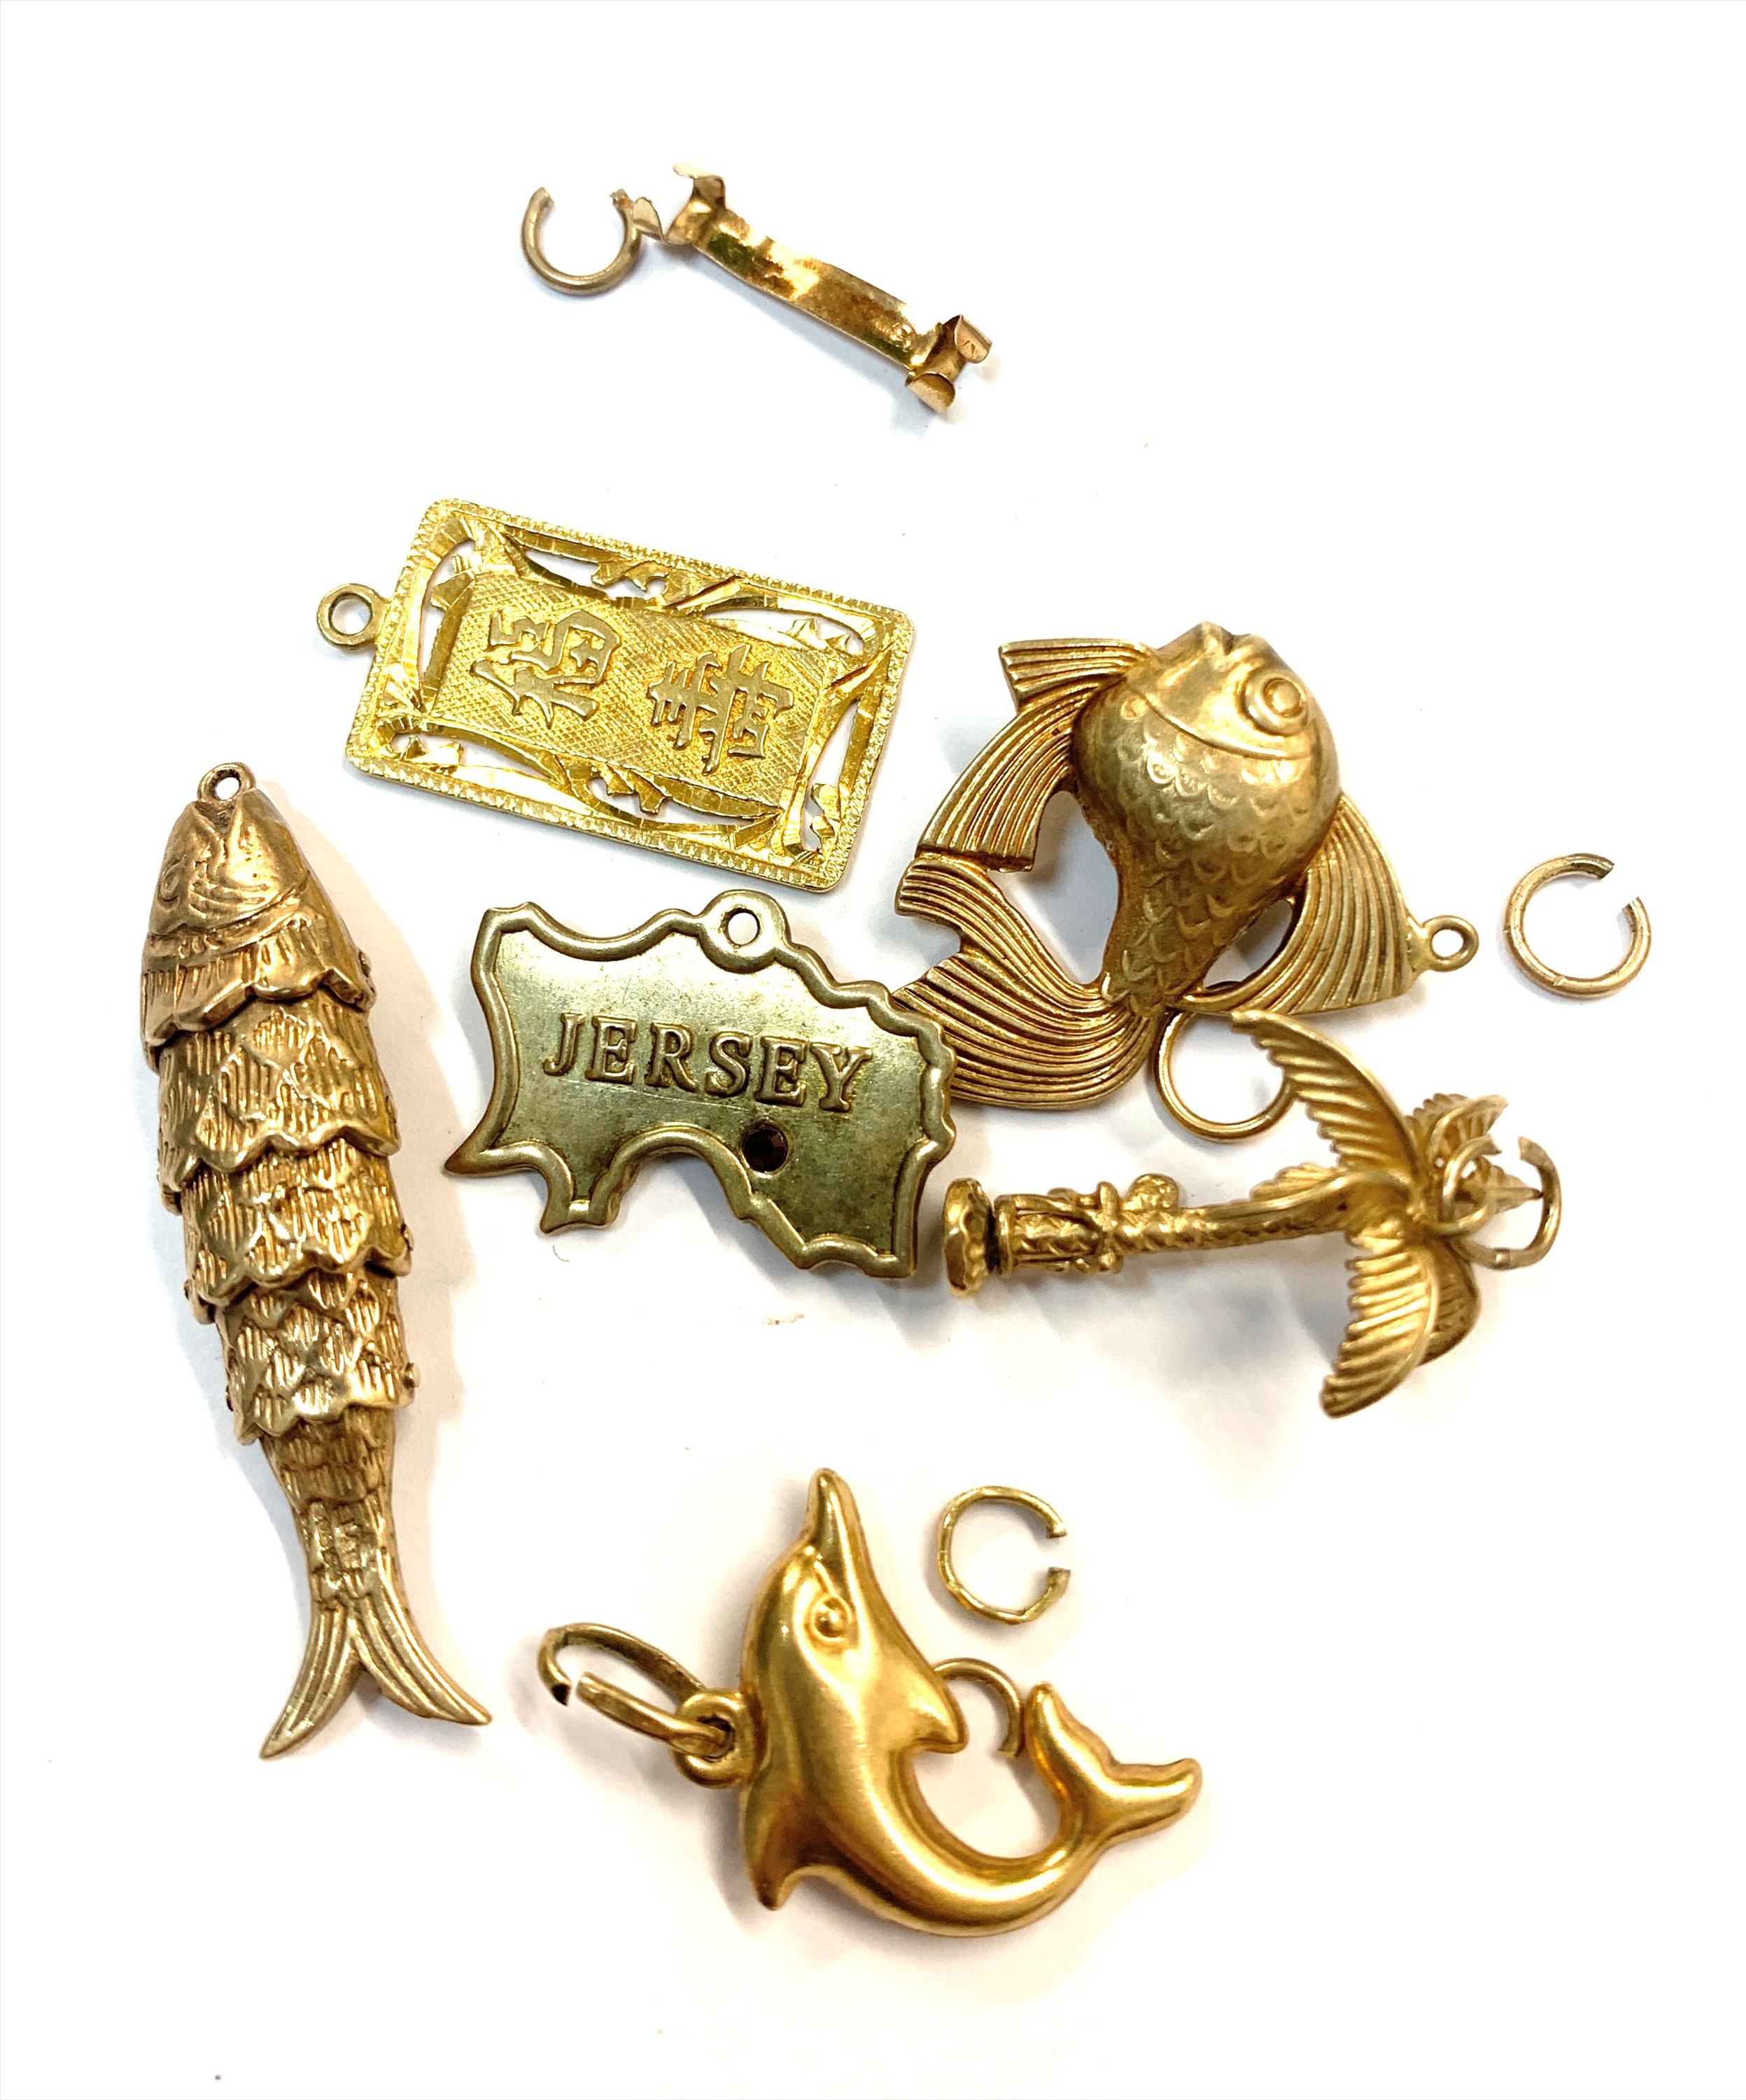 A Chinese high purity gold charm 2.2gm and five other gold charms tog with gold rings 14.2gm